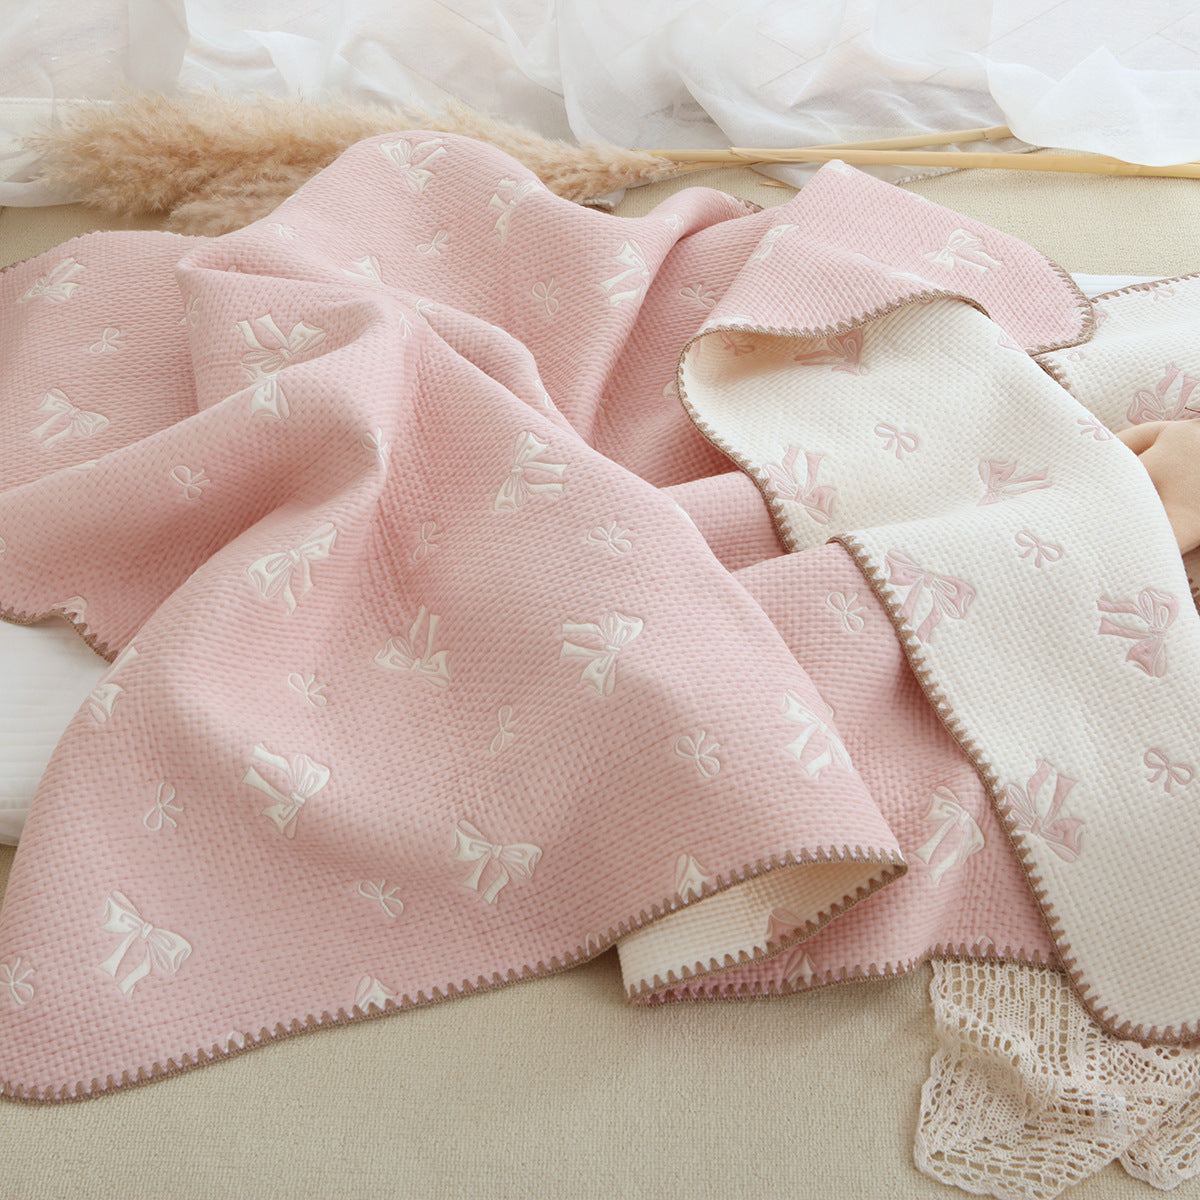 Quality Cotton Baby Blanket (5 design options)